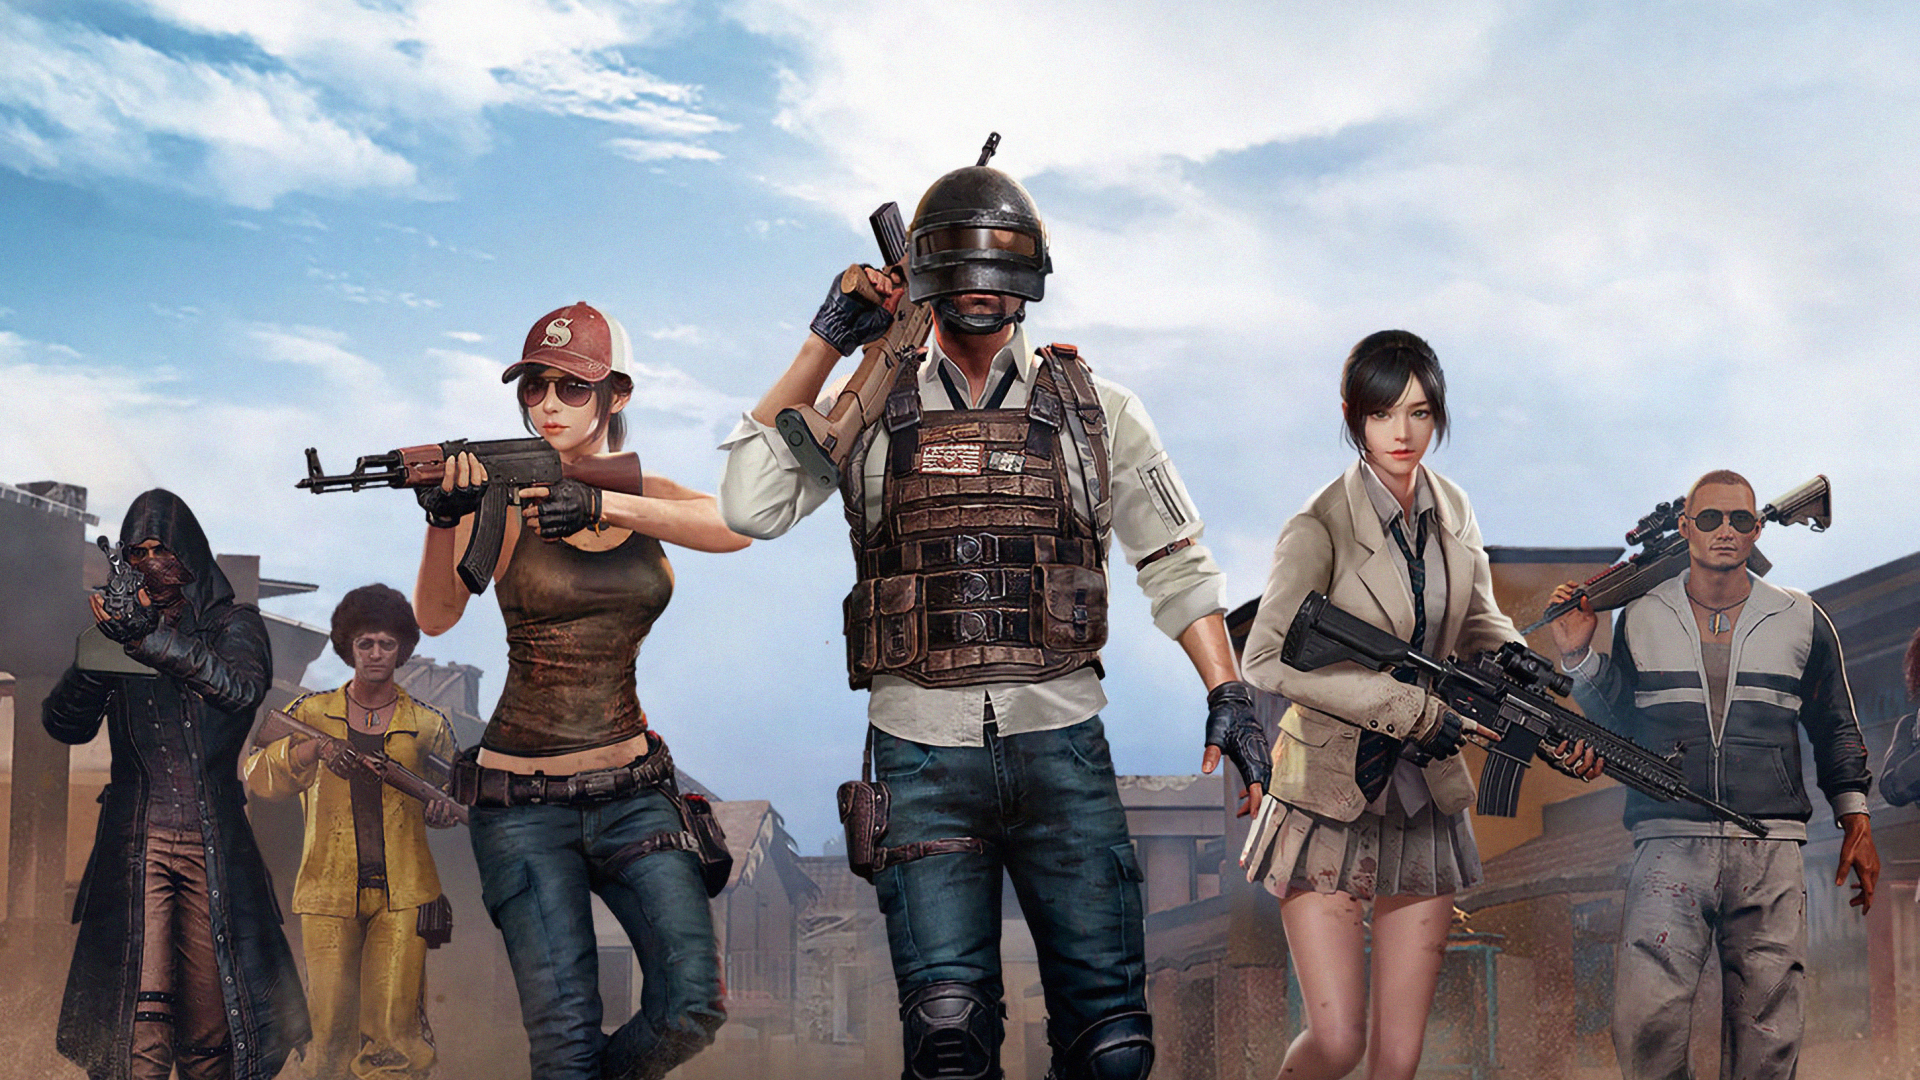 Download 1920x1080 wallpaper pc game, squad of pubg, full hd, hdtv, fhd